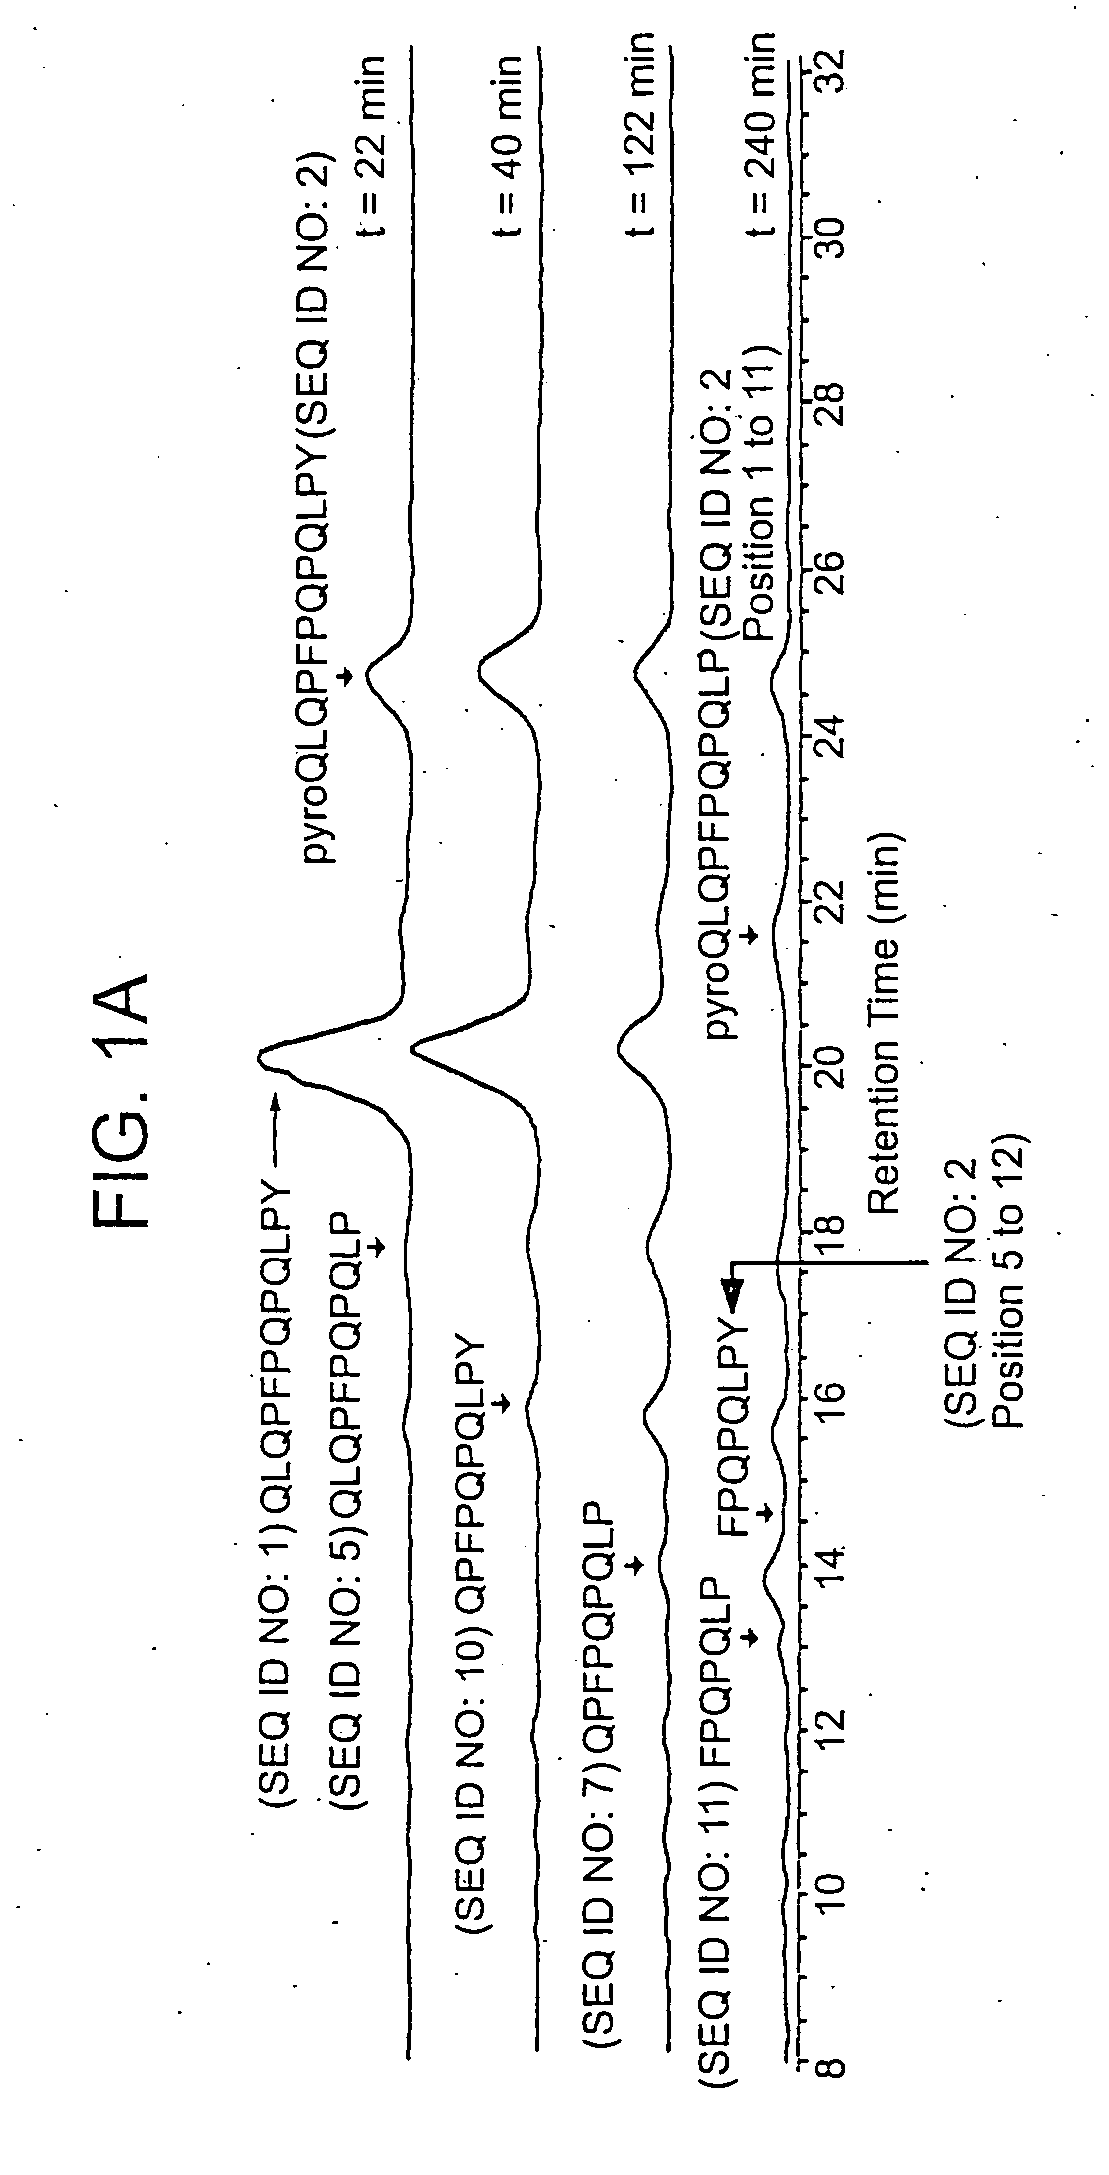 Peptides for diagnostic and therapeutic methods for celiac sprue